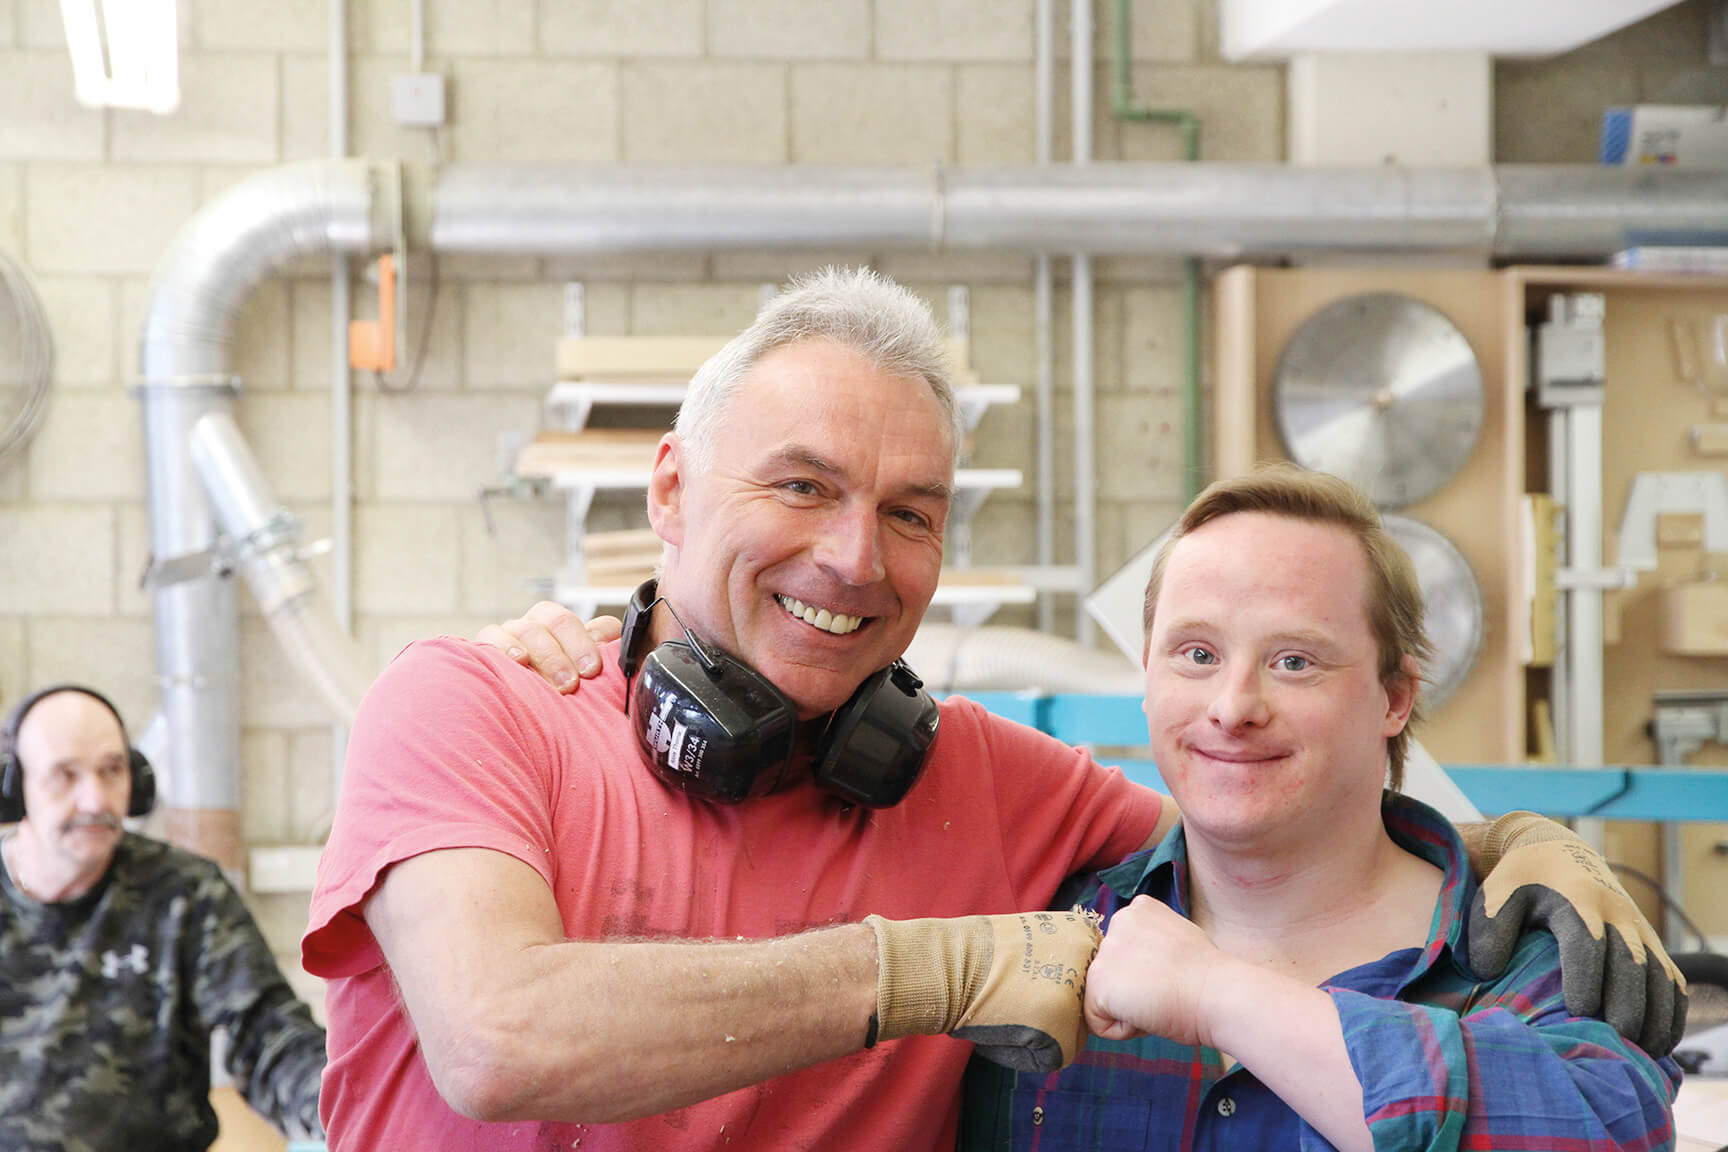 Two employees from Metalog Tools, which uses skilled workers with disabilities to make its award-winning and sustainable training tools